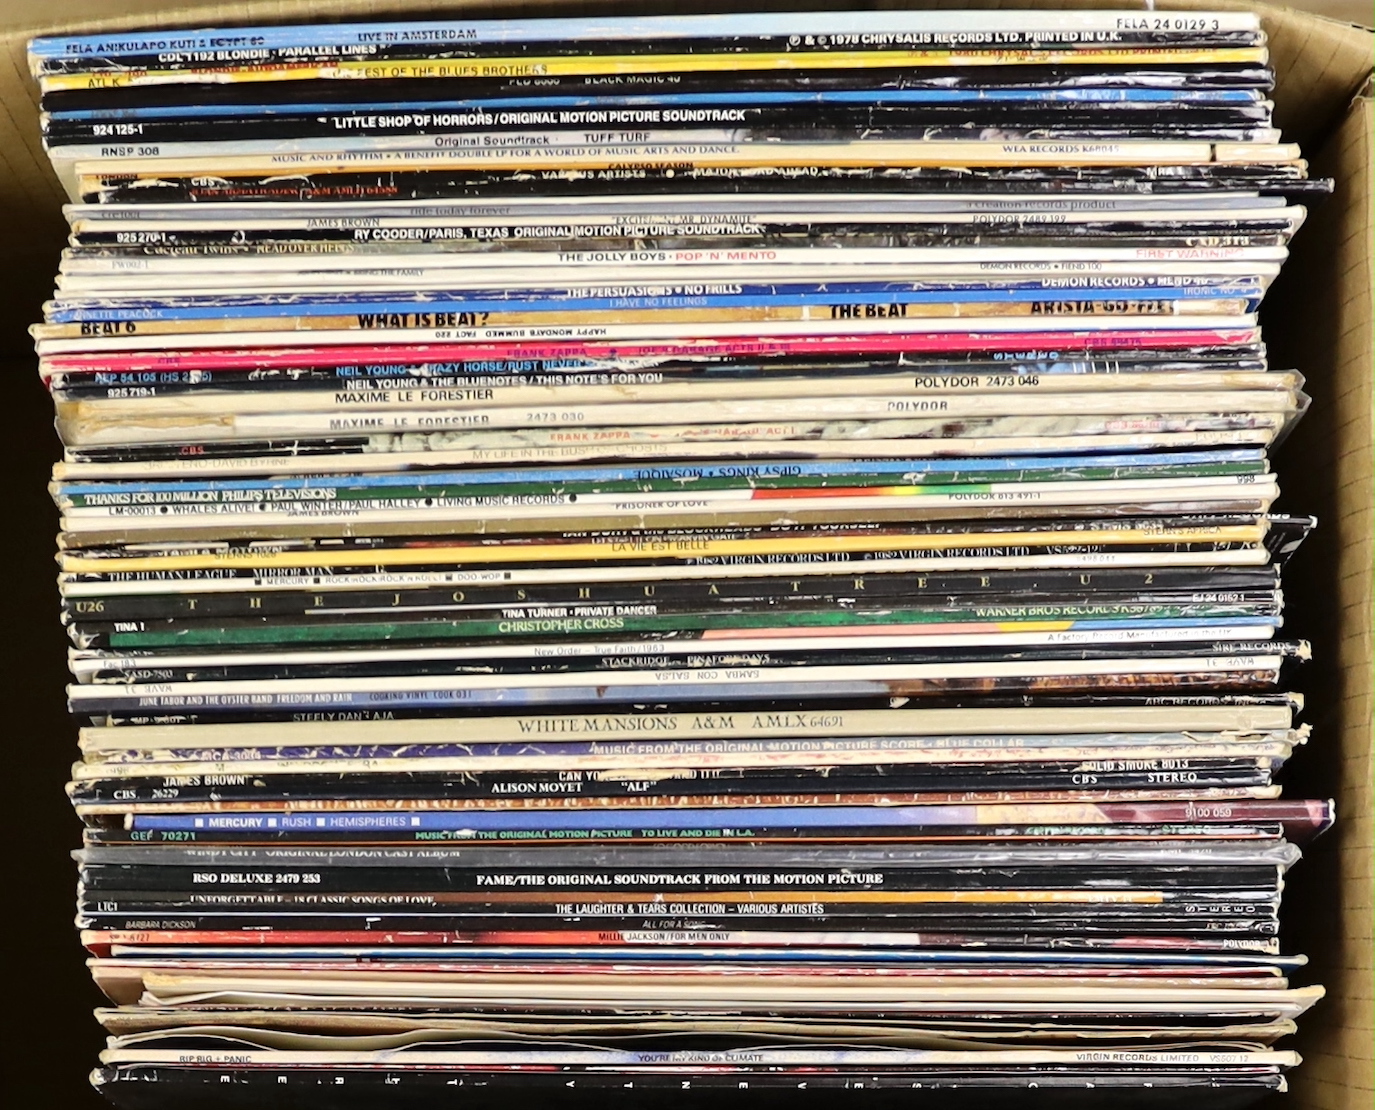 Seventy mostly 1980's LPs, including Blondie, Joan Armatrading, Texas, Happy Mondays, Neil Young and crazy horse, Ian Dury and the Blockheads, Tina Turner, James Brown, etc.